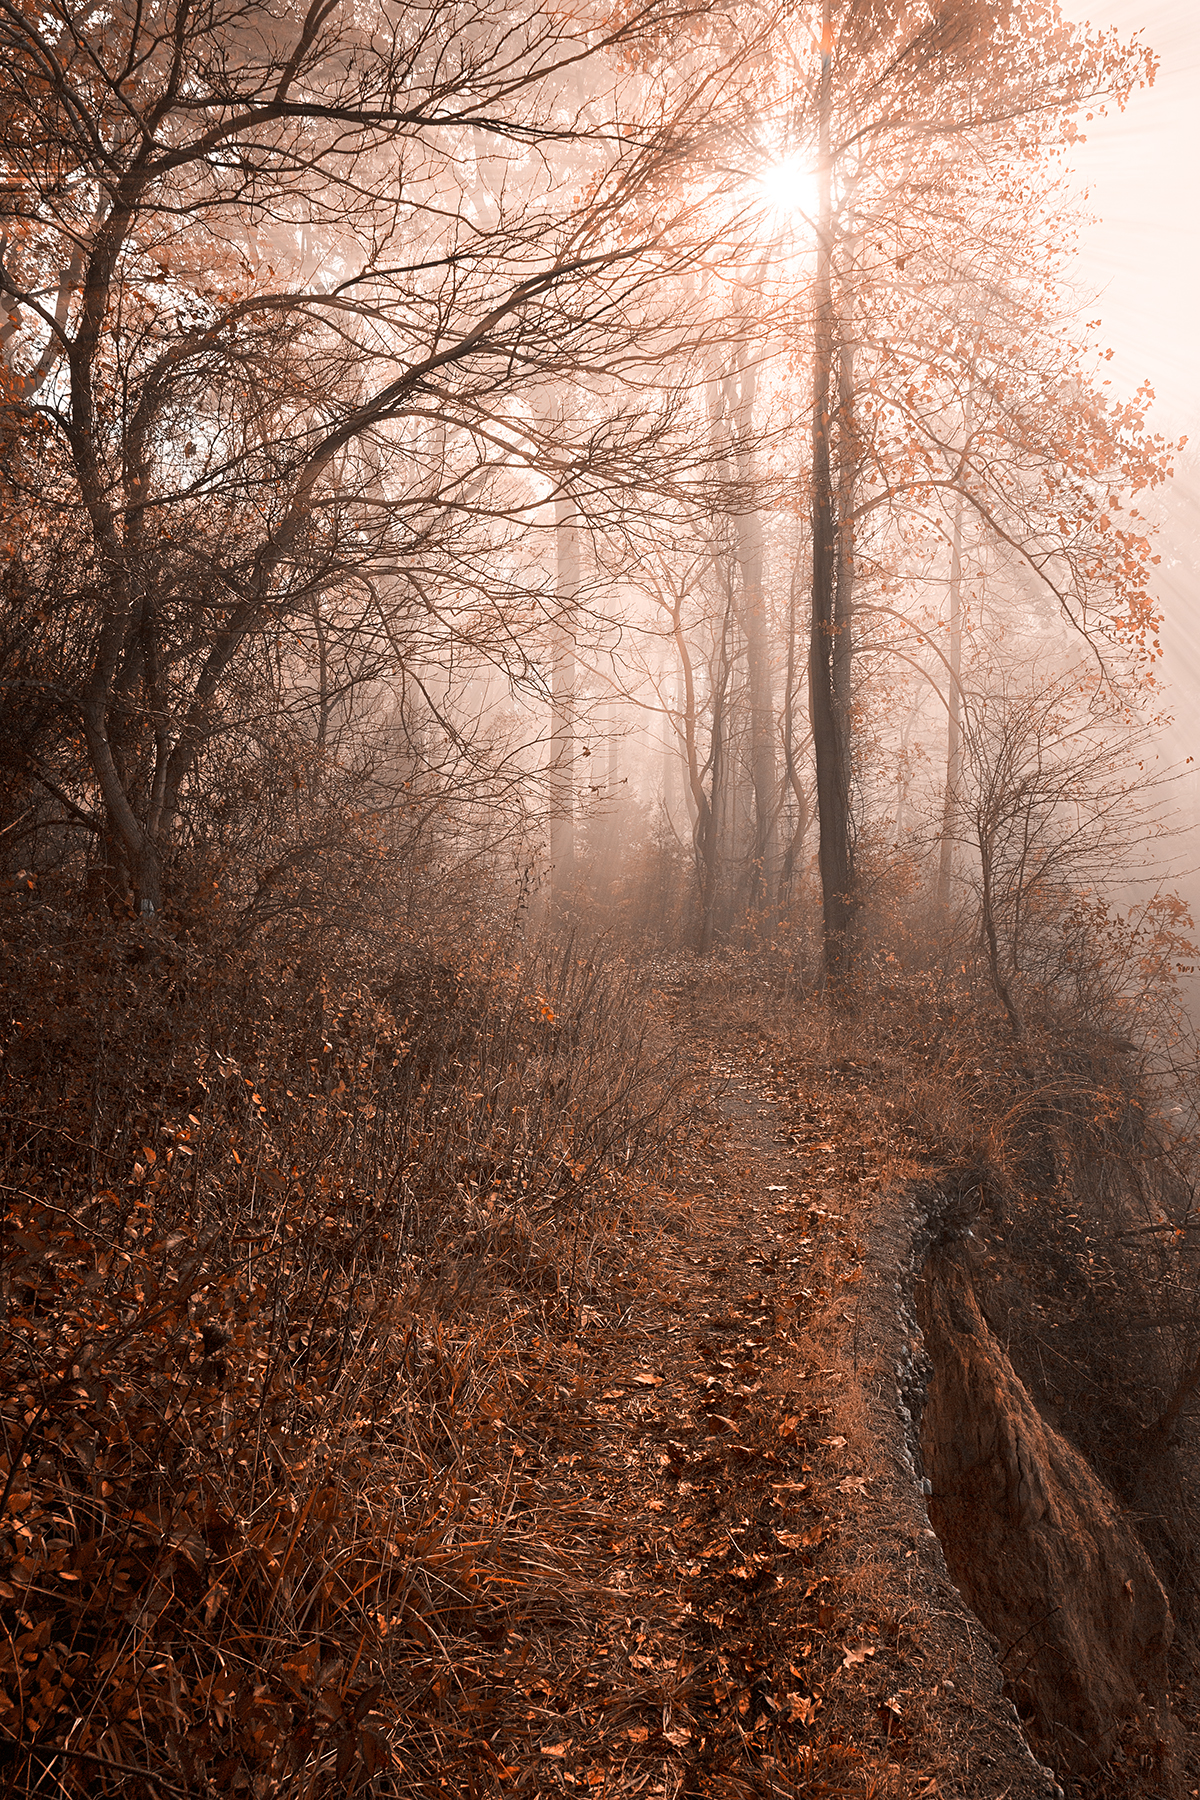 Misty sun kissed trail - hdr photo